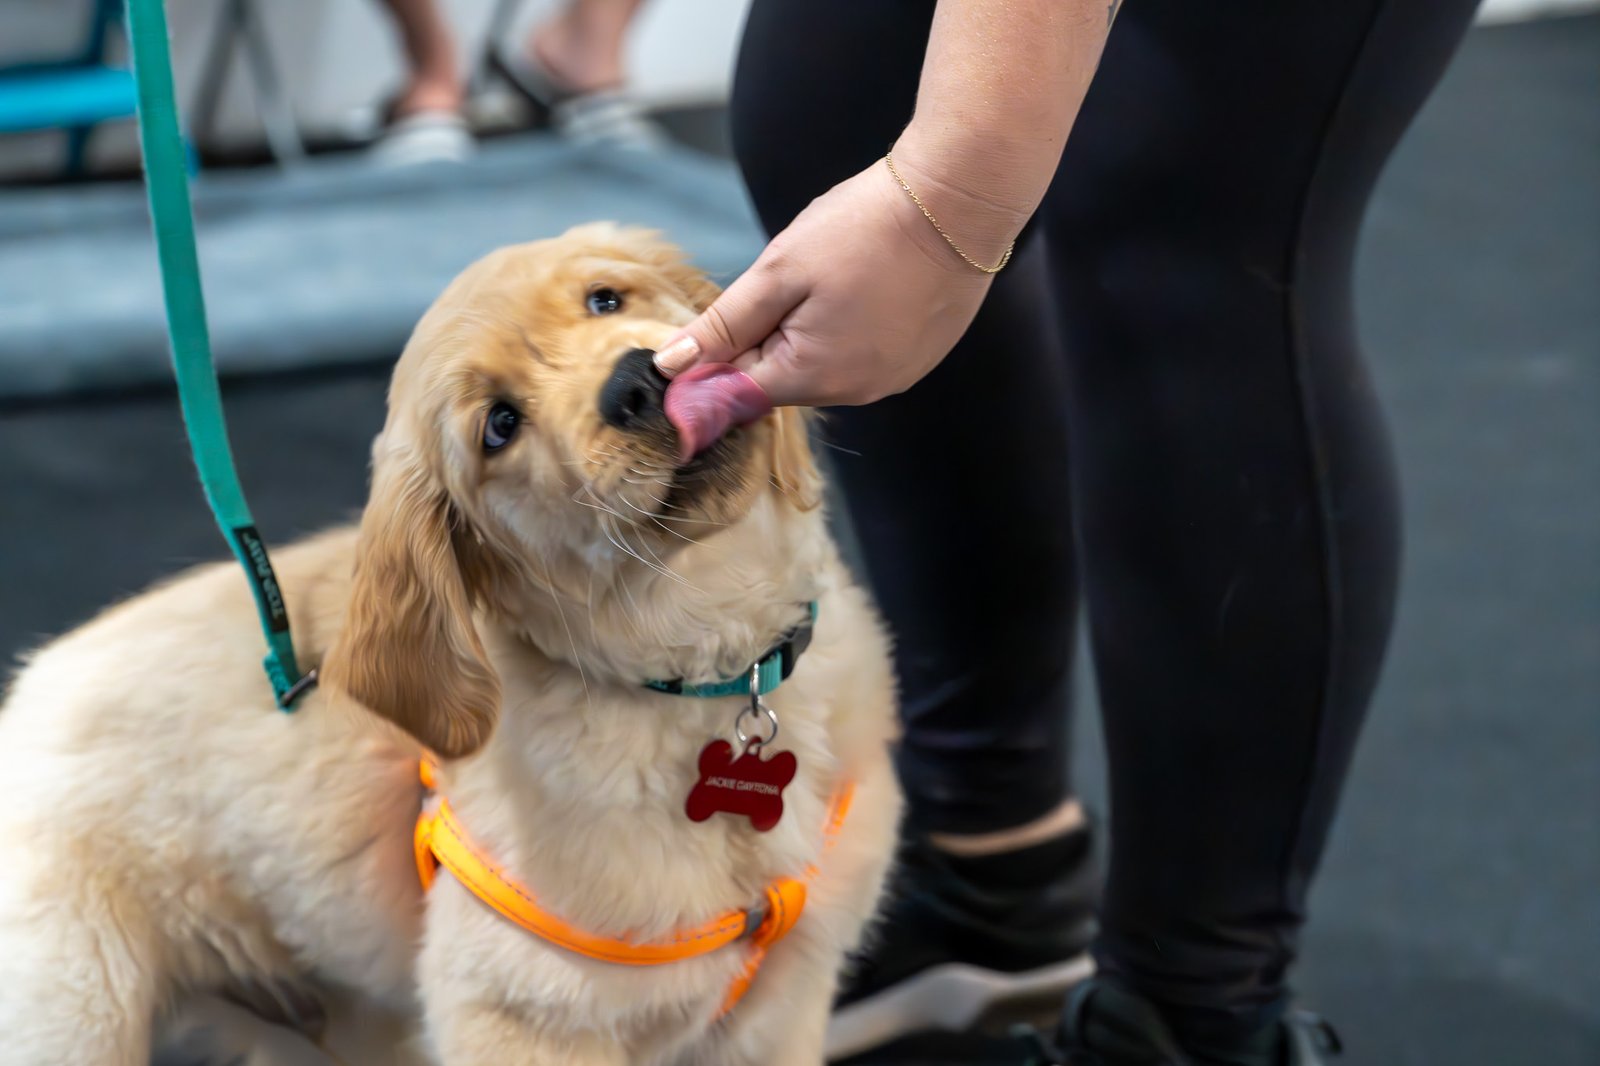 Golden Retriever puppy licking a person's fingers